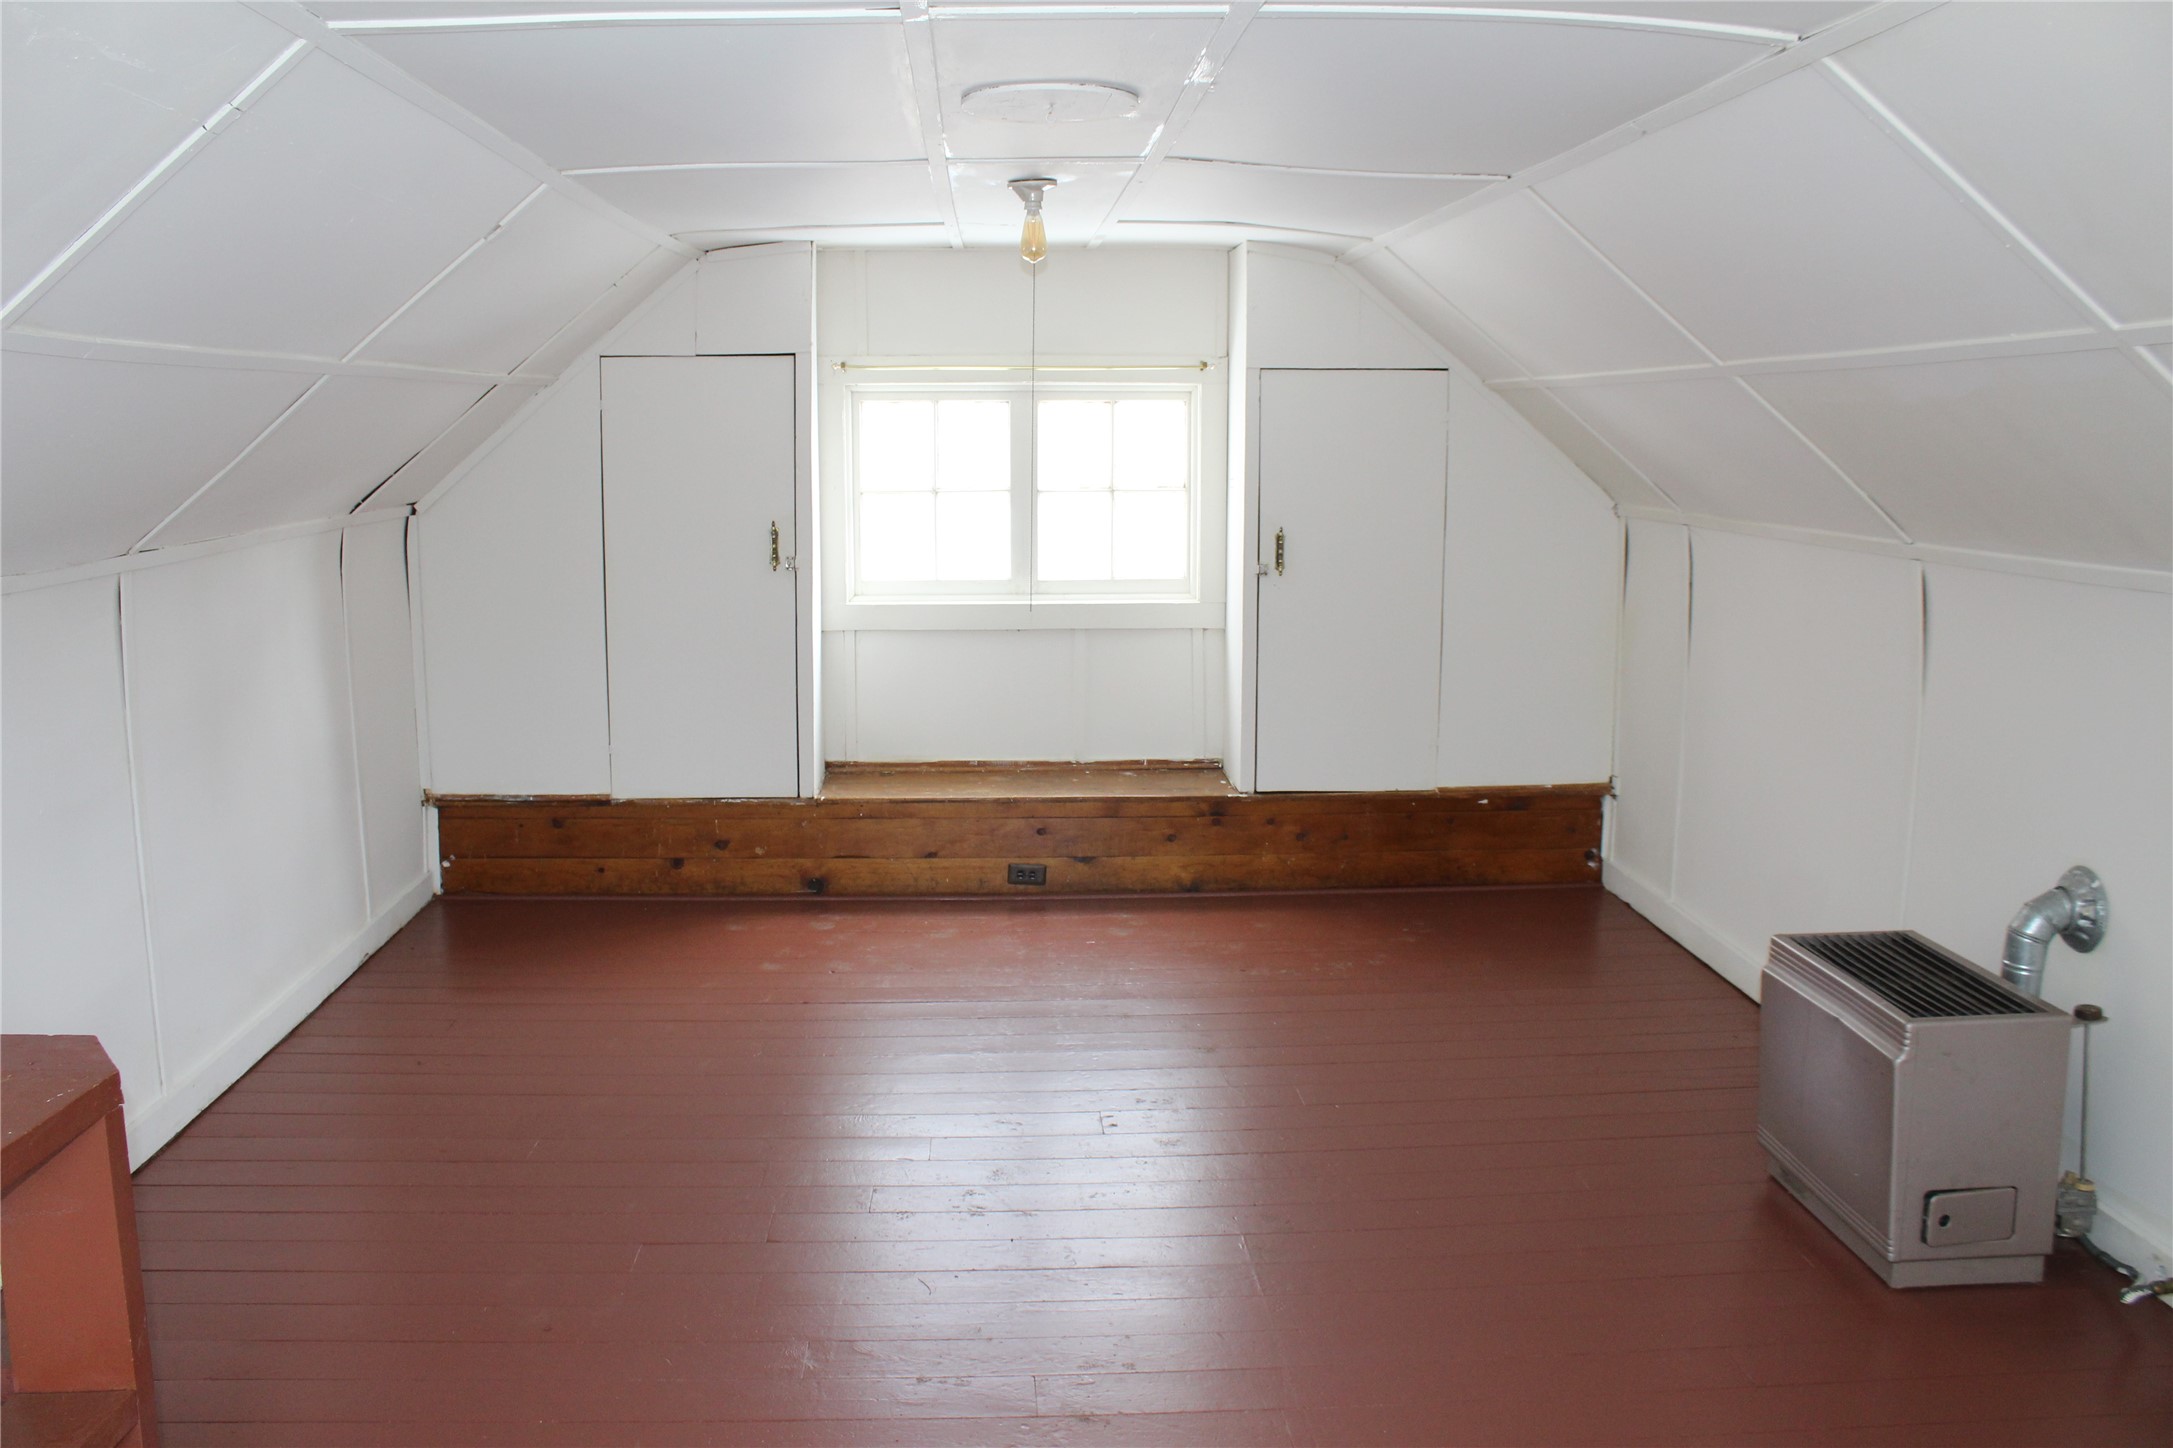 upstairs room with gas heater and closets